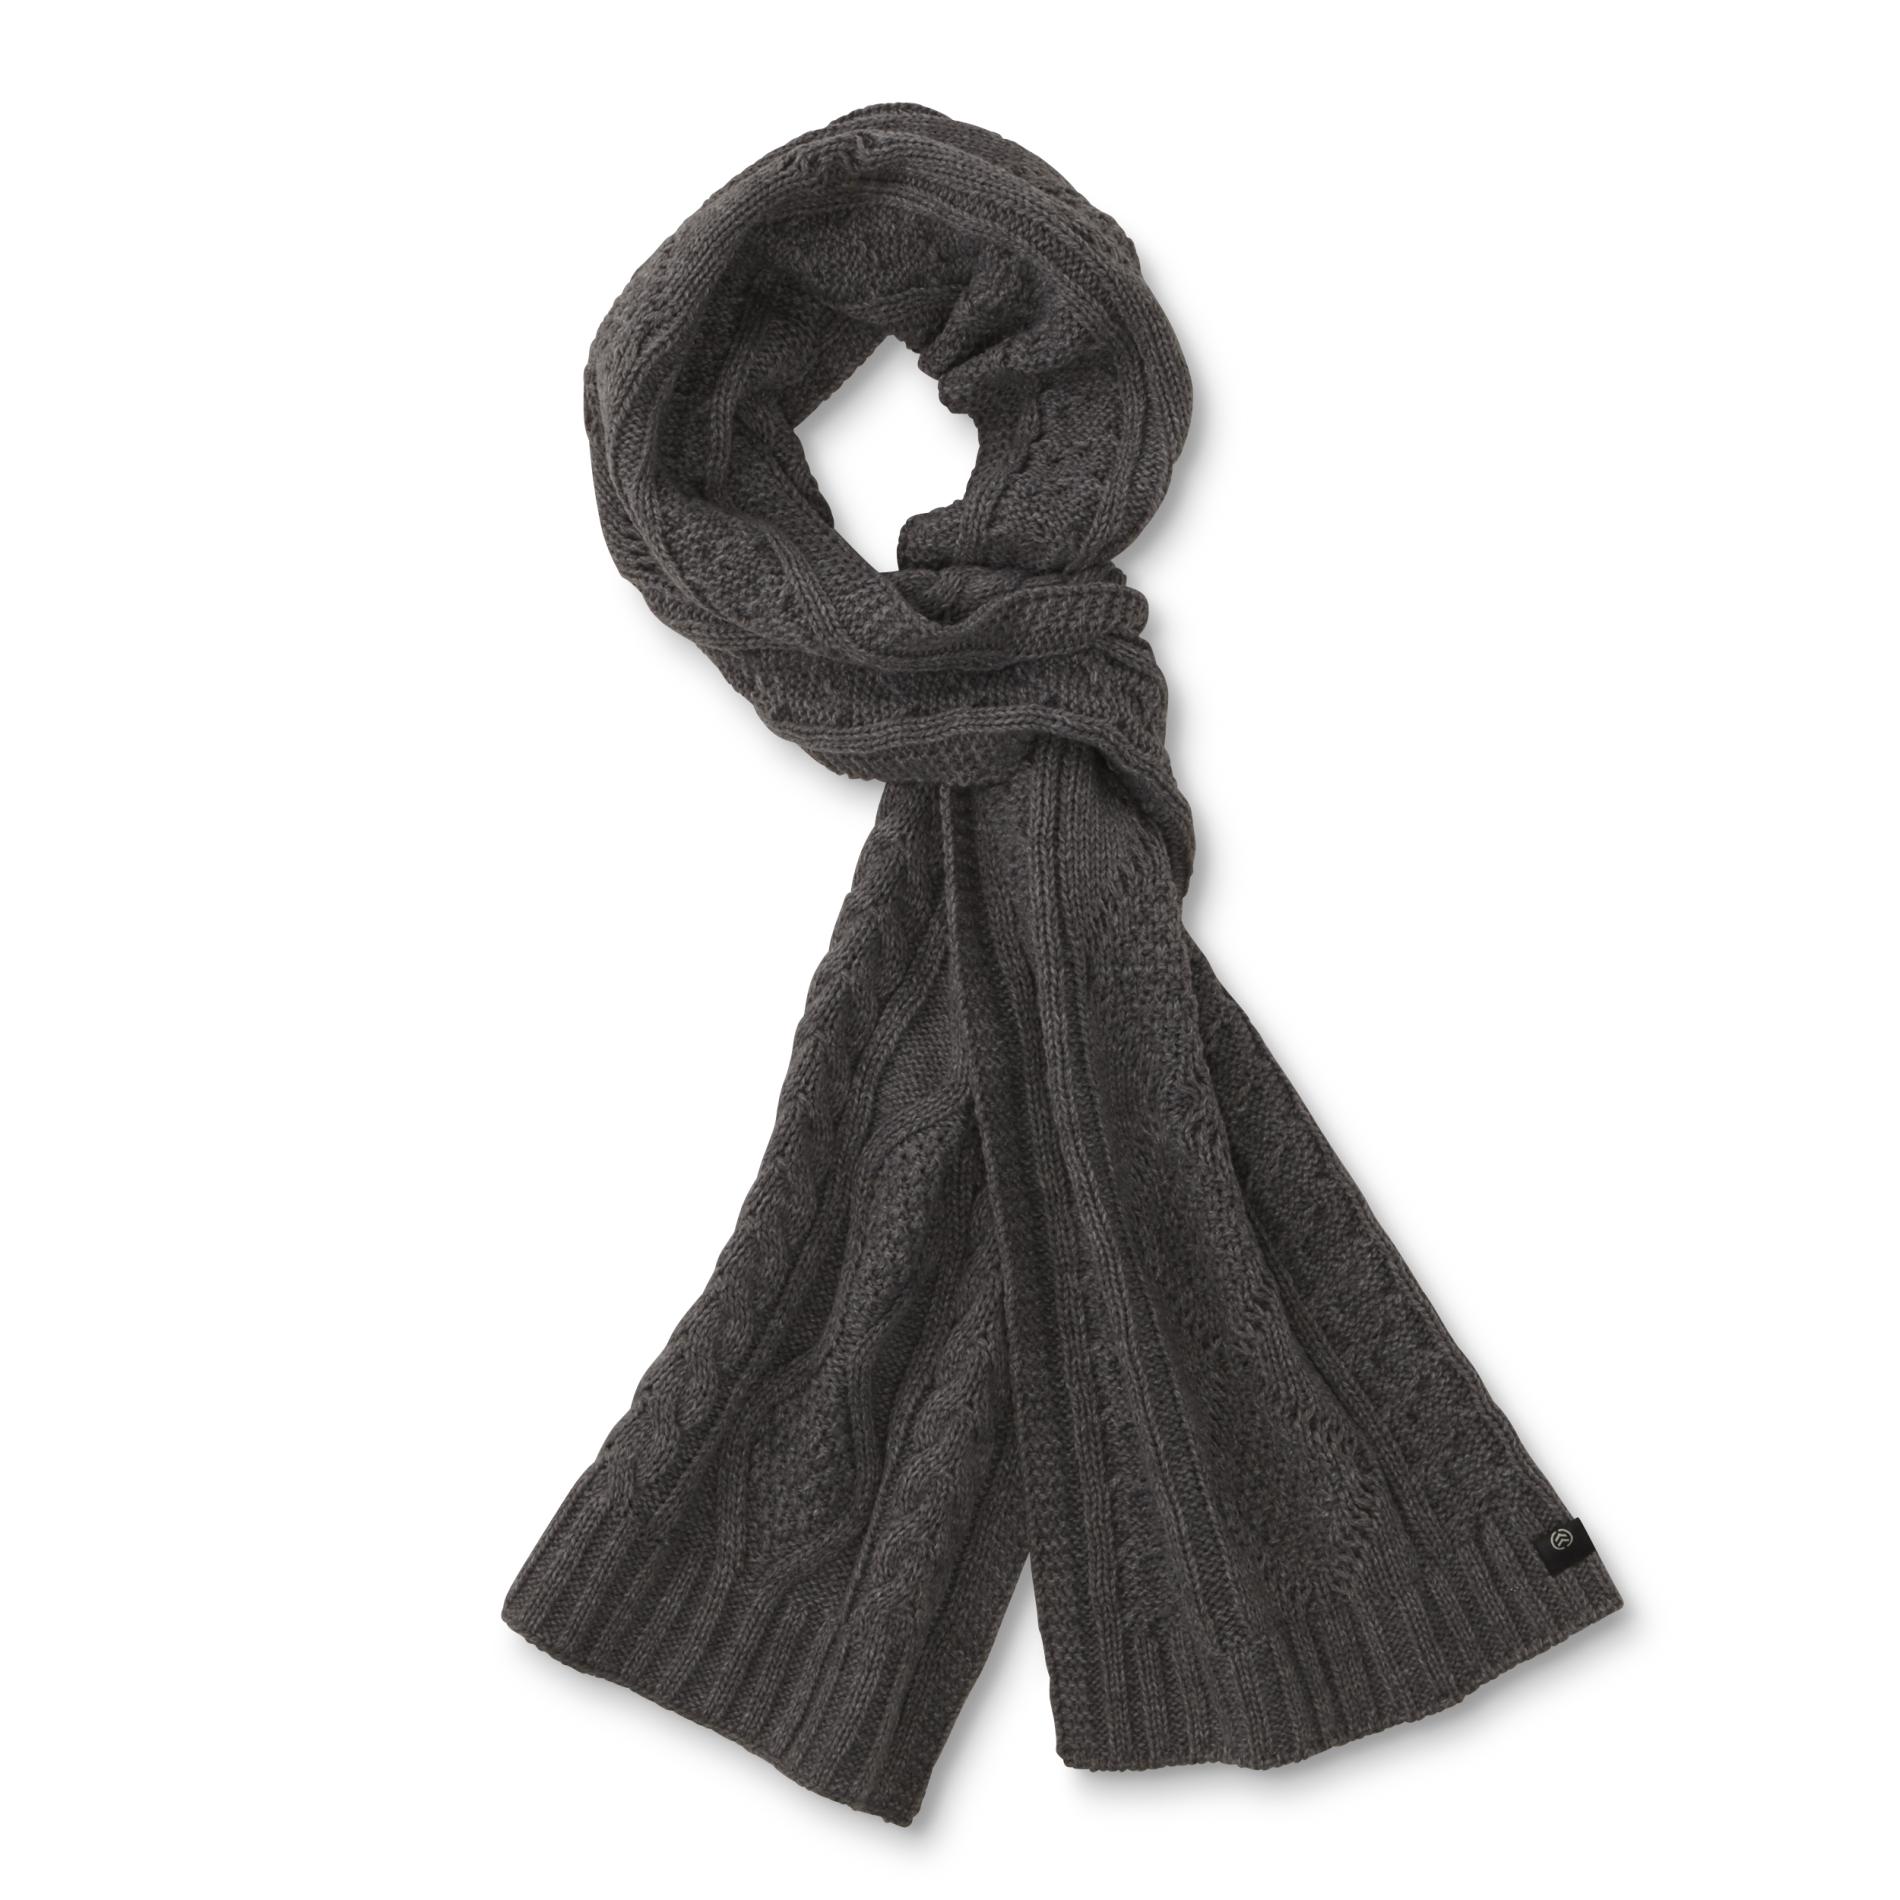 Isotoner Women's Cable Knit Scarf